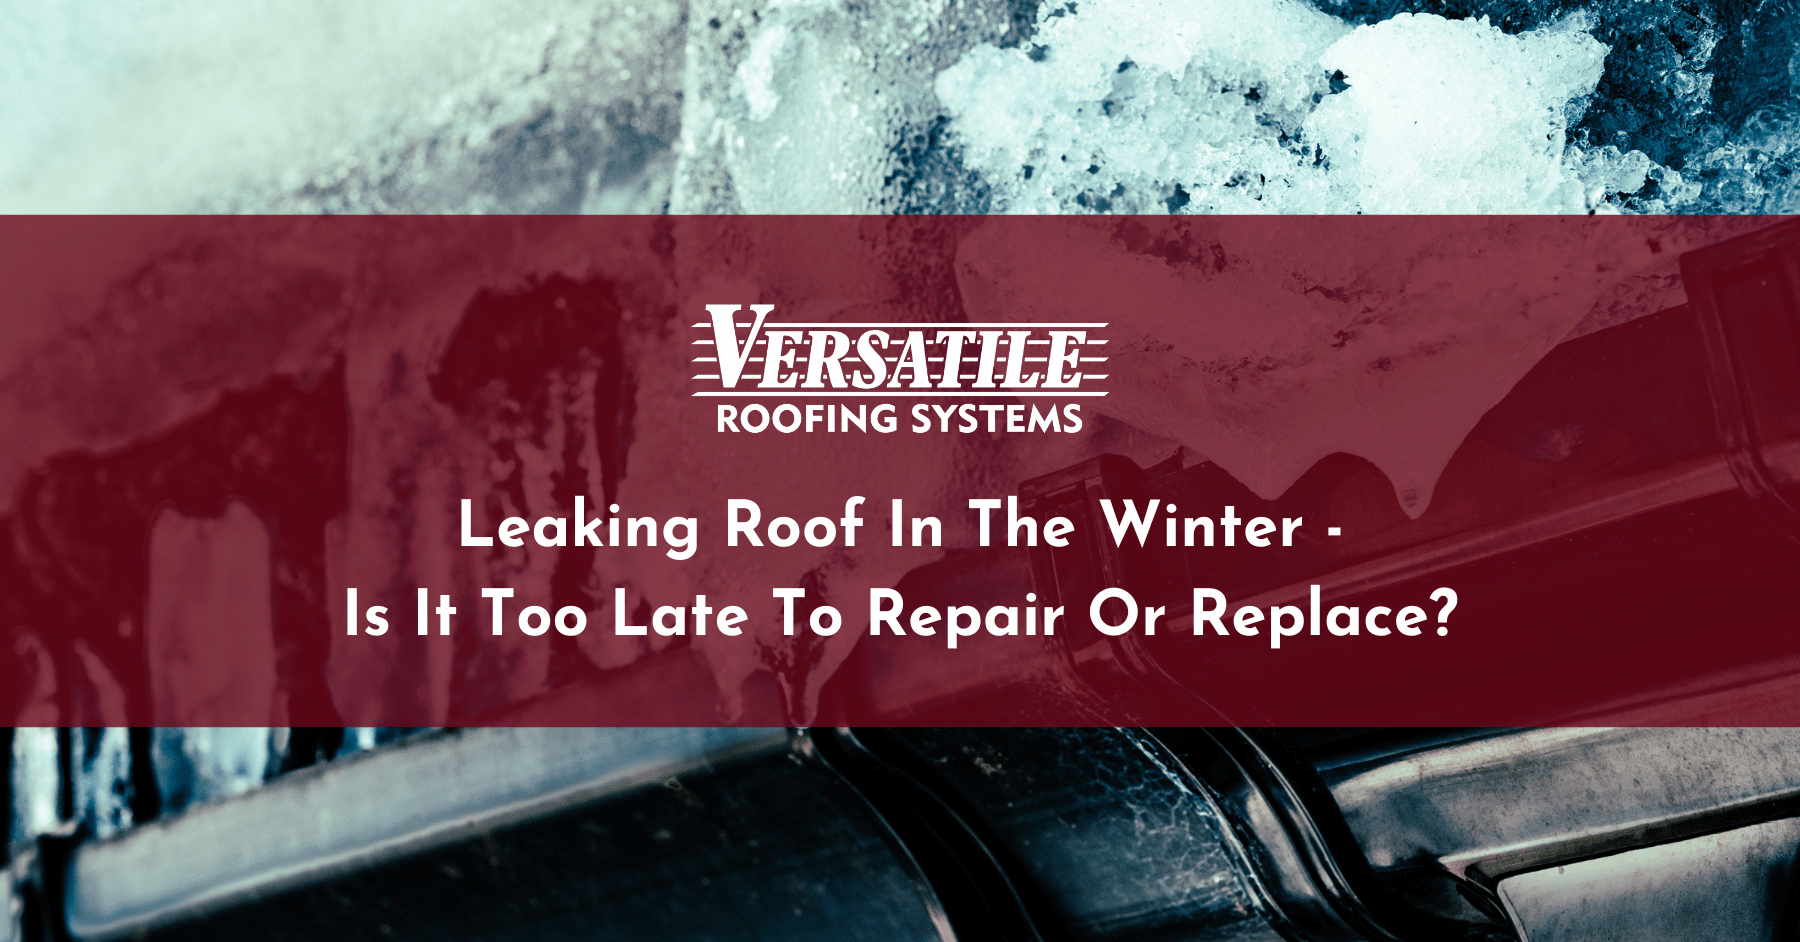 Leaking Roof In The Winter Is It Too Late To Repair Or Replace - Versatile Roofing Systems